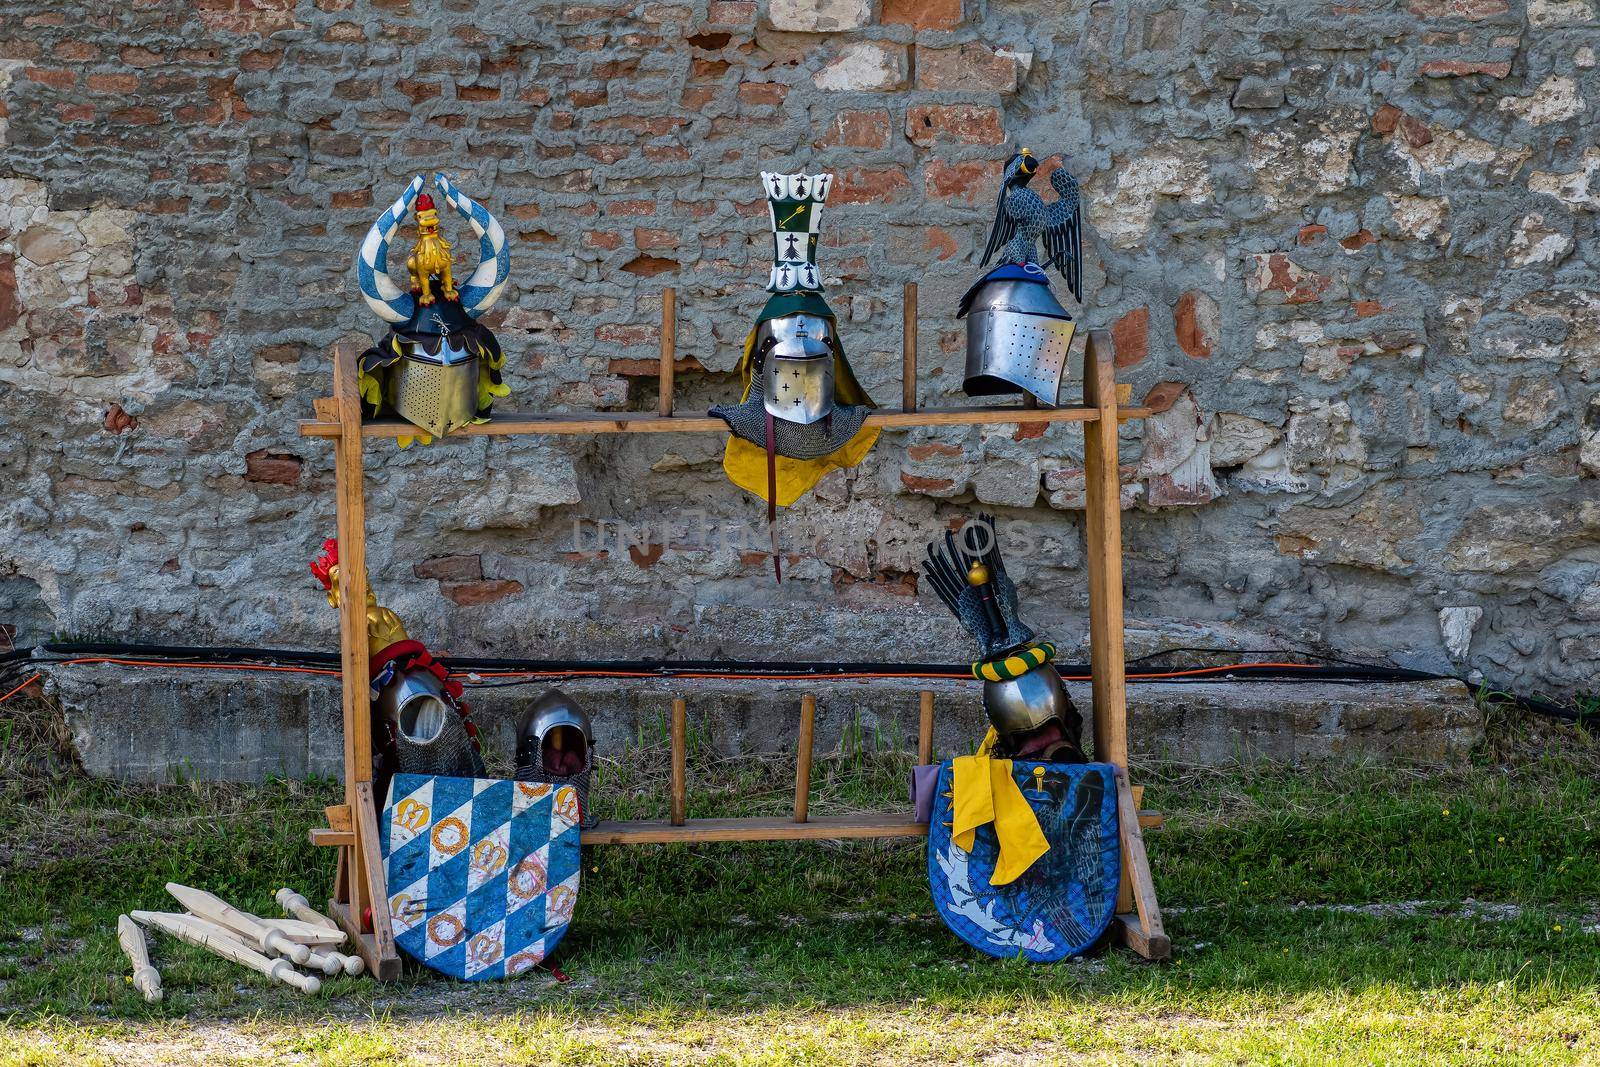 exhibited replicas of historical knightly helmets and shield by rostik924